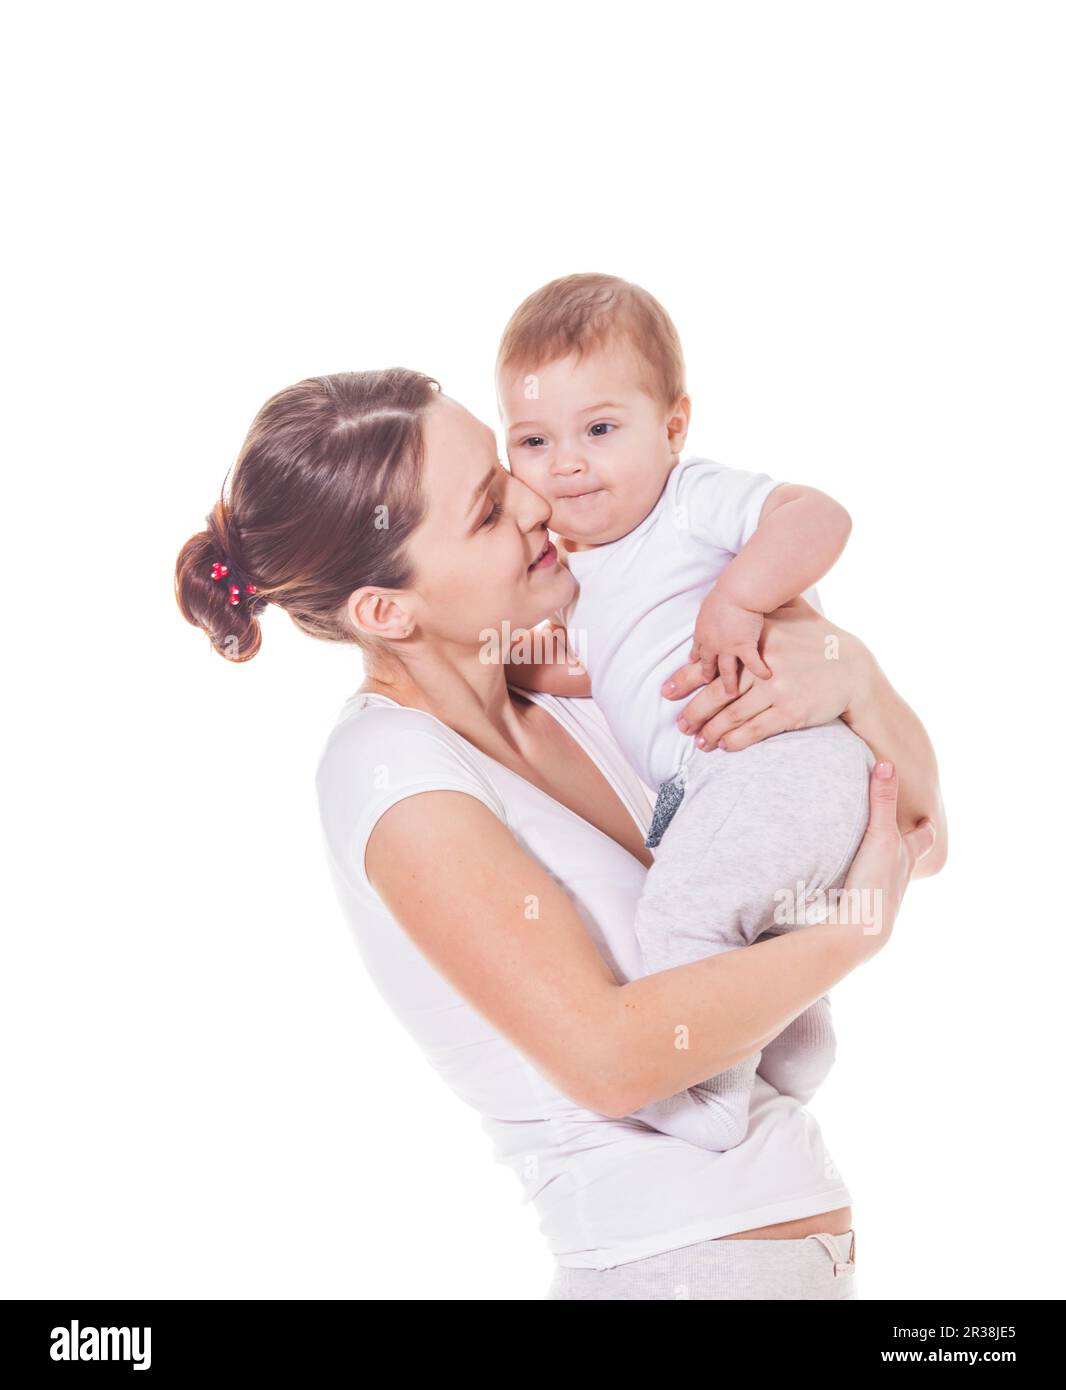 Adorable mother and baby Stock Photo